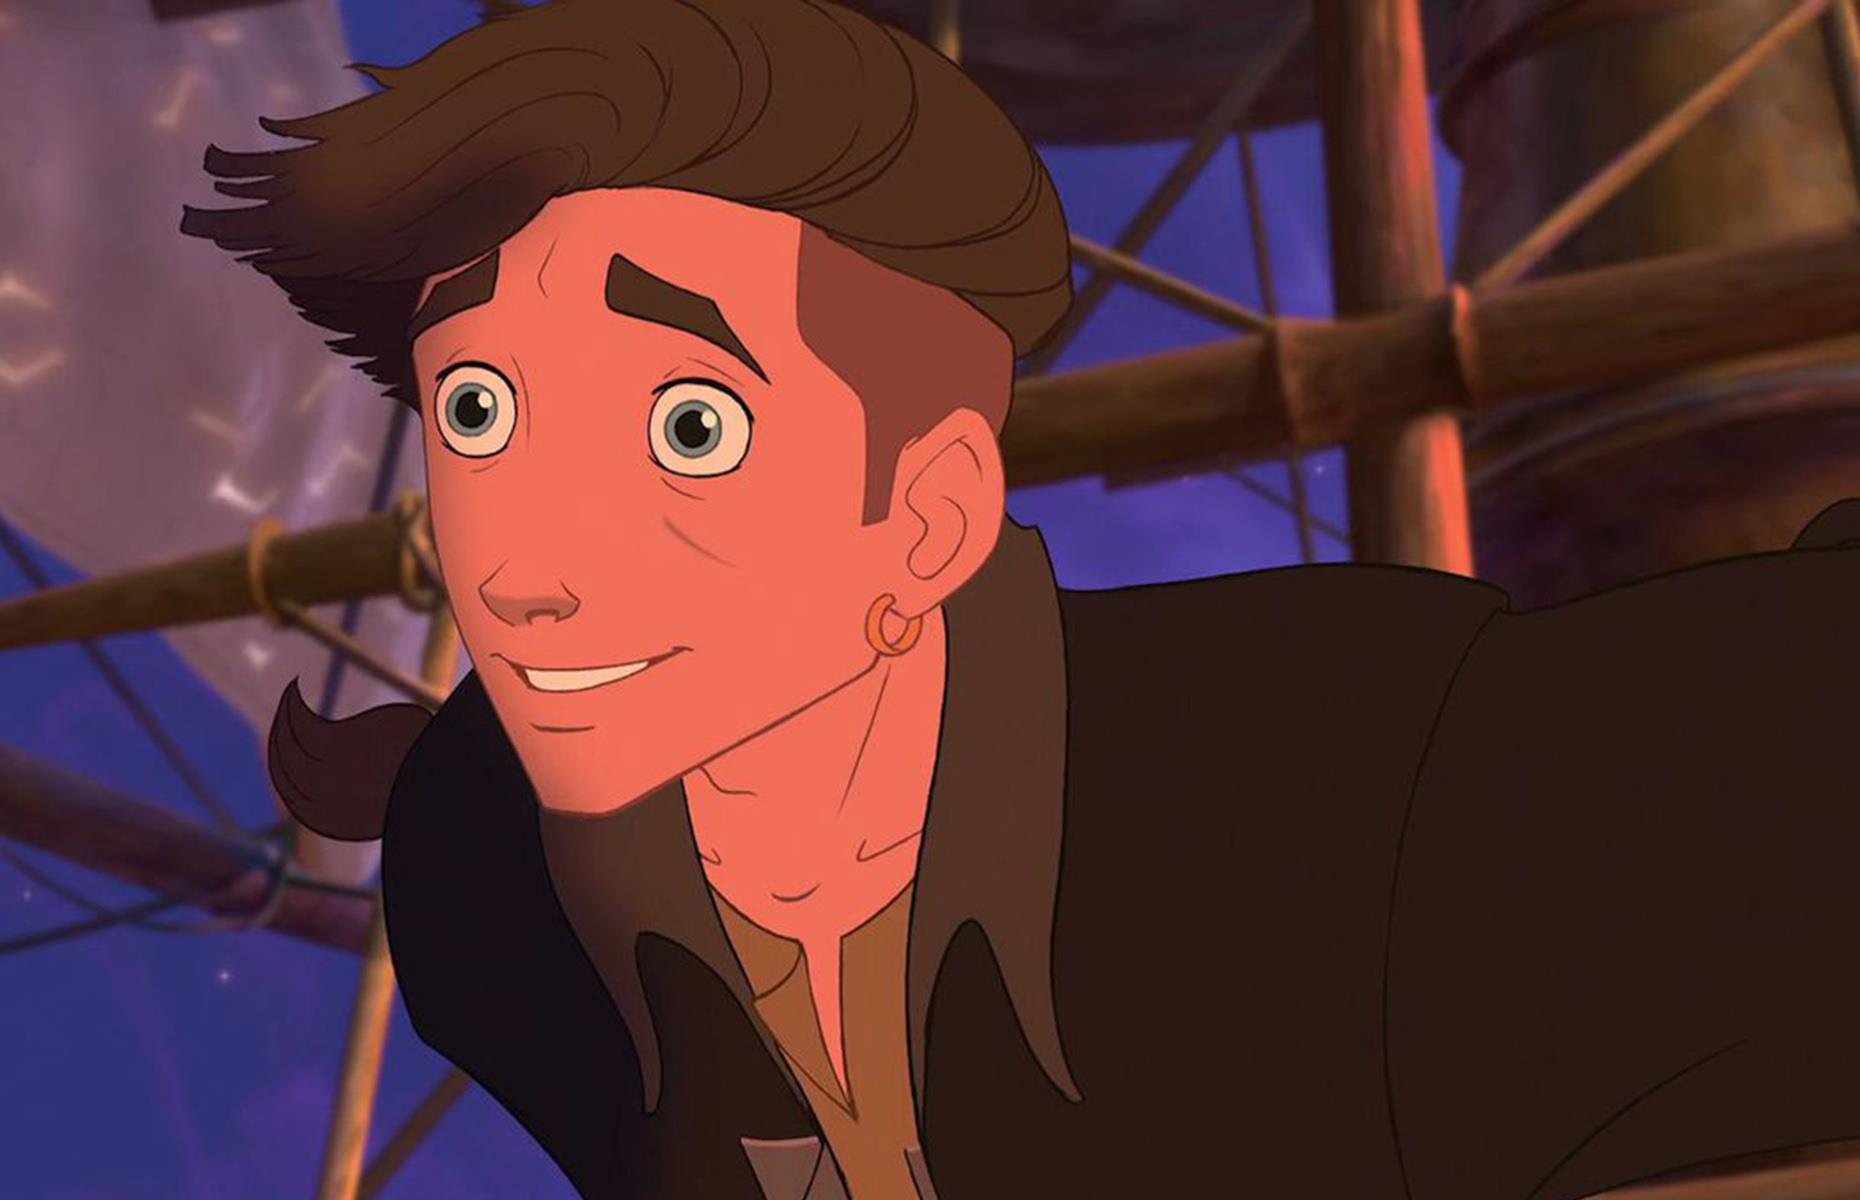 <p>Disney's swashbuckling adventure saga<em> Treasure Planet</em> sailed onto screens in 2002. Featuring a cutting-edge animation style and a stellar cast of voice actors, including Joseph Gordon-Levitt, Emma Thompson, and Martin Short, the film boasted a staggering $140 million production budget.</p>  <p>Despite its current status as a cult classic, the movie failed to make a splash at the box office, earning just $110 million globally upon its release. A significant factor in its dismal performance was the stiff competition it faced from the likes of <em>Harry Potter and the Chamber of Secrets </em>and <em>Die Another Day.</em></p>  <p>While it fell short by $30 million compared to its production budget, the financial outcome becomes even more bleak when the costs of marketing the movie are factored in. Sources estimate that Disney suffered losses ranging from $85 million to a colossal $240 million. </p>